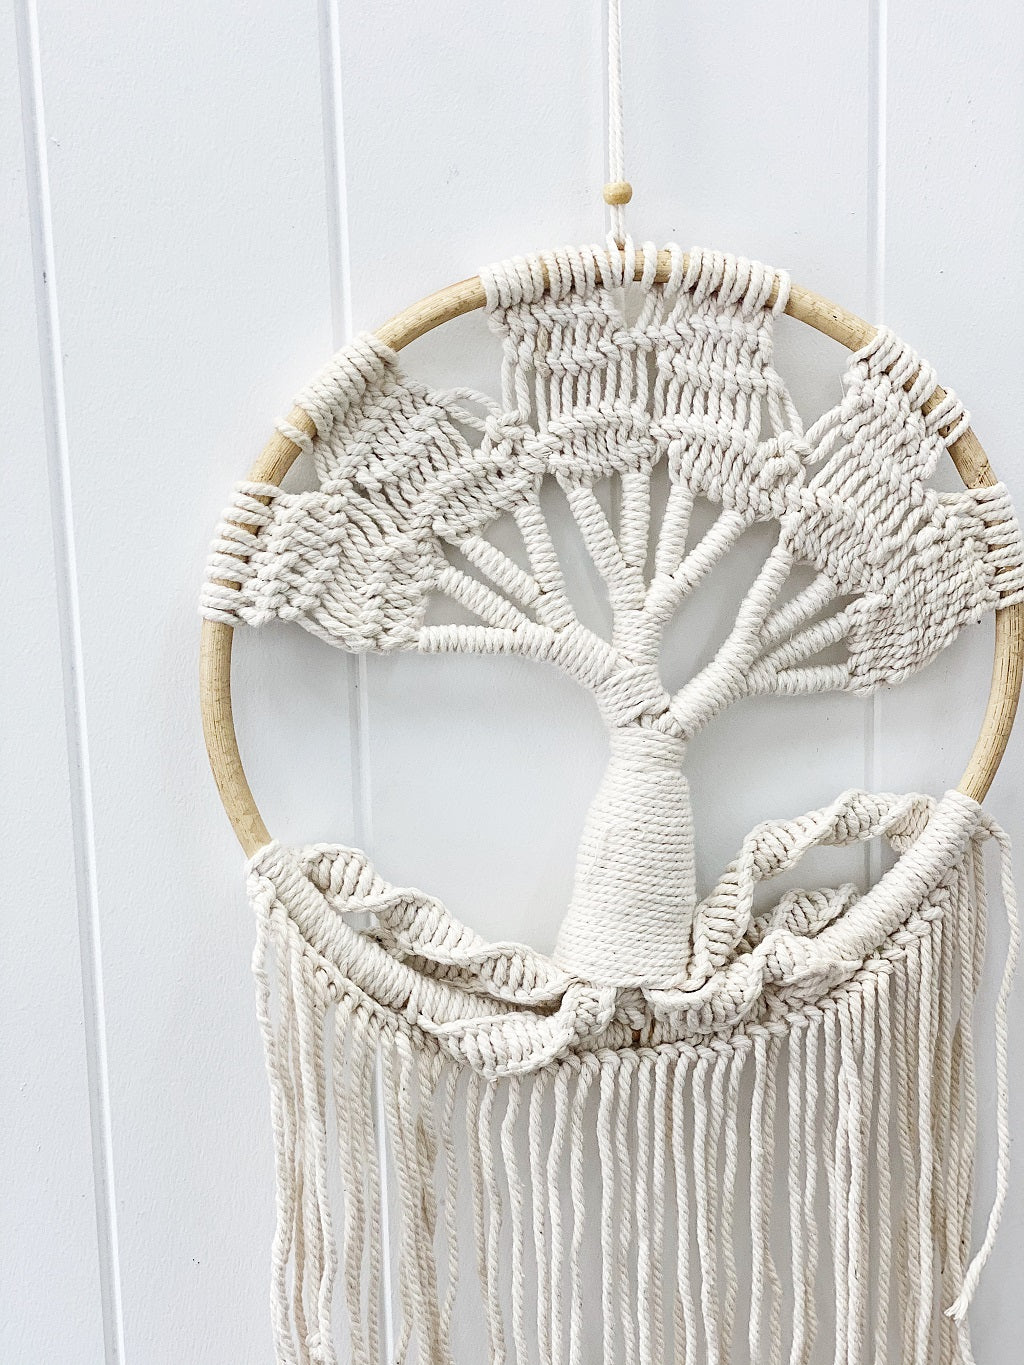 Bring bohemian style and a sense of comfort with a soothing colour palette and textures to your home with our beautiful Macrame Tree of Life Dream Catcher. A Dream Catcher is thought to catch bad dreams and let only good dreams through to the dreamer below. Shop Online. AfterPay available. Australia Wide Shipping | Bliss Gifts &amp; Homewares - Unit 8, 259 Princes Hwy Ulladulla - 0427795959, 44541523